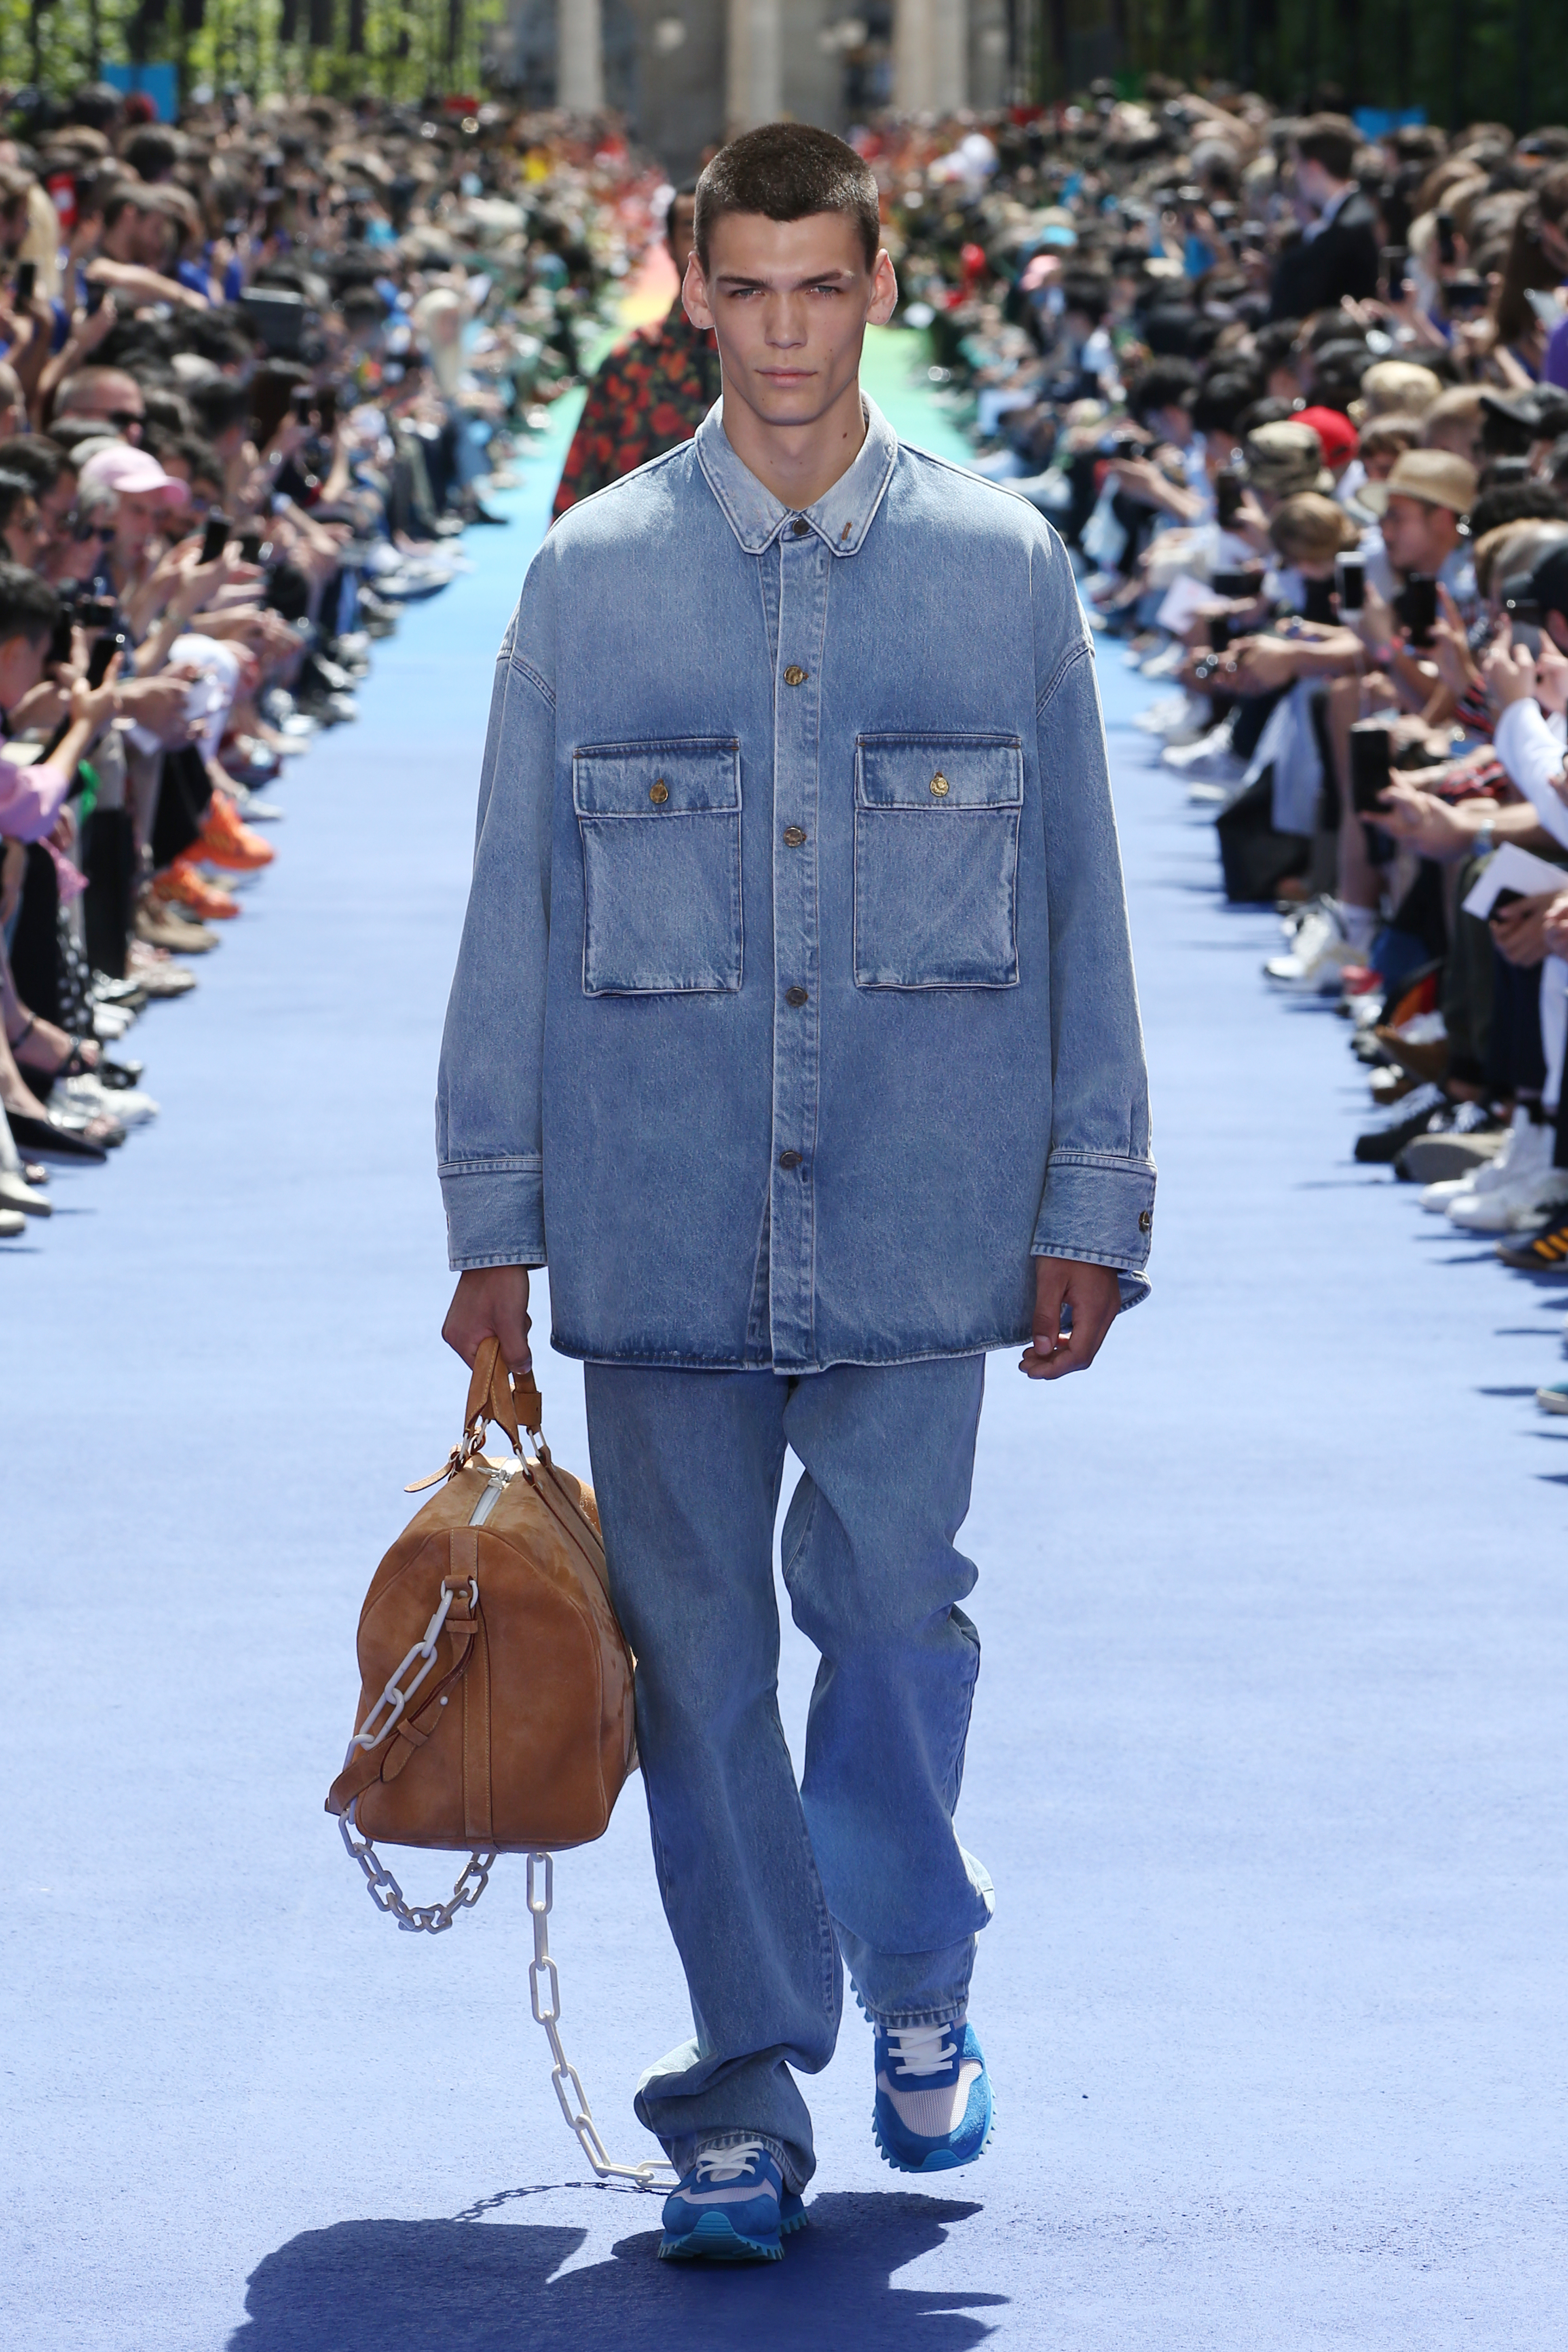 Here's the Price List of Virgil Abloh's SS19 Louis Vuitton Collection